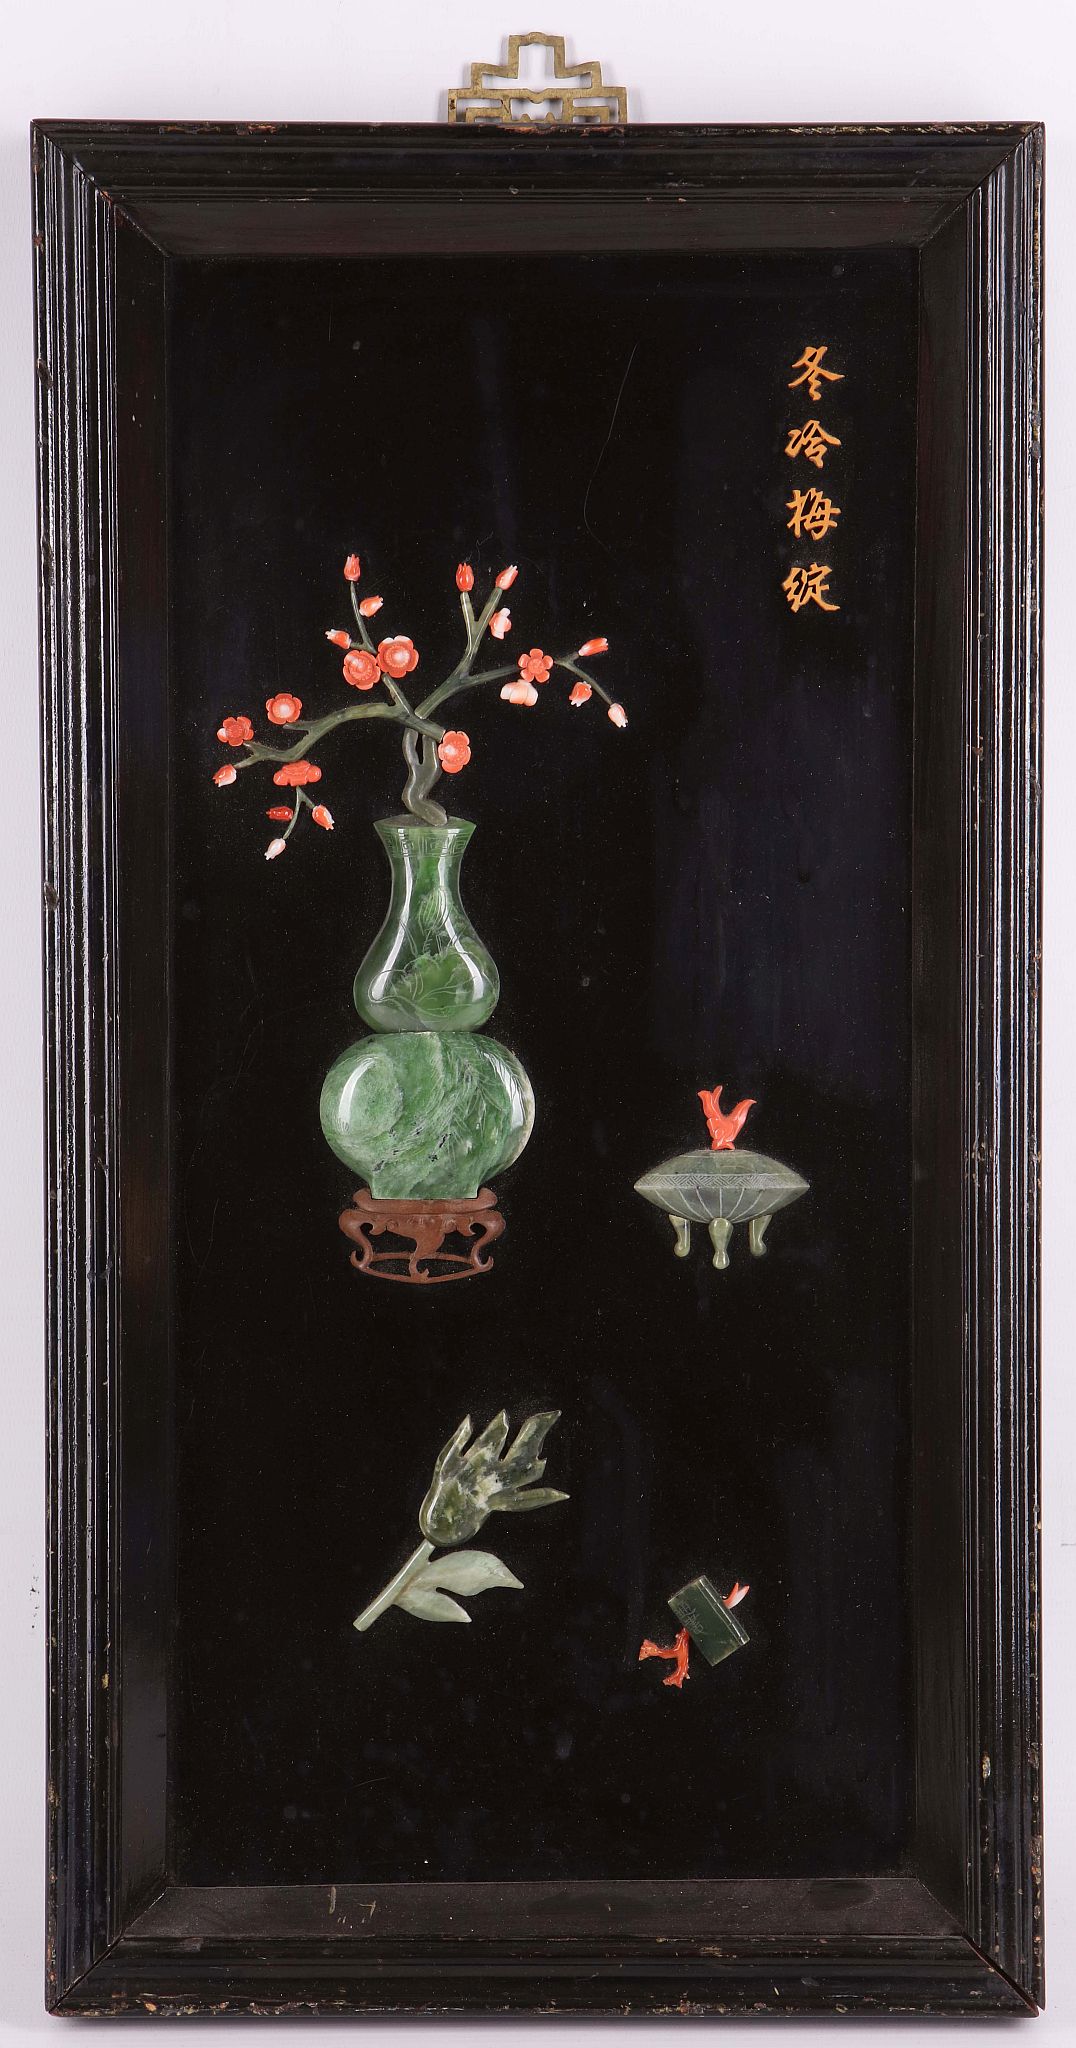 A Chinese wooden panel inlaid with jade and coral antique treasures, 28cm x 52cm.